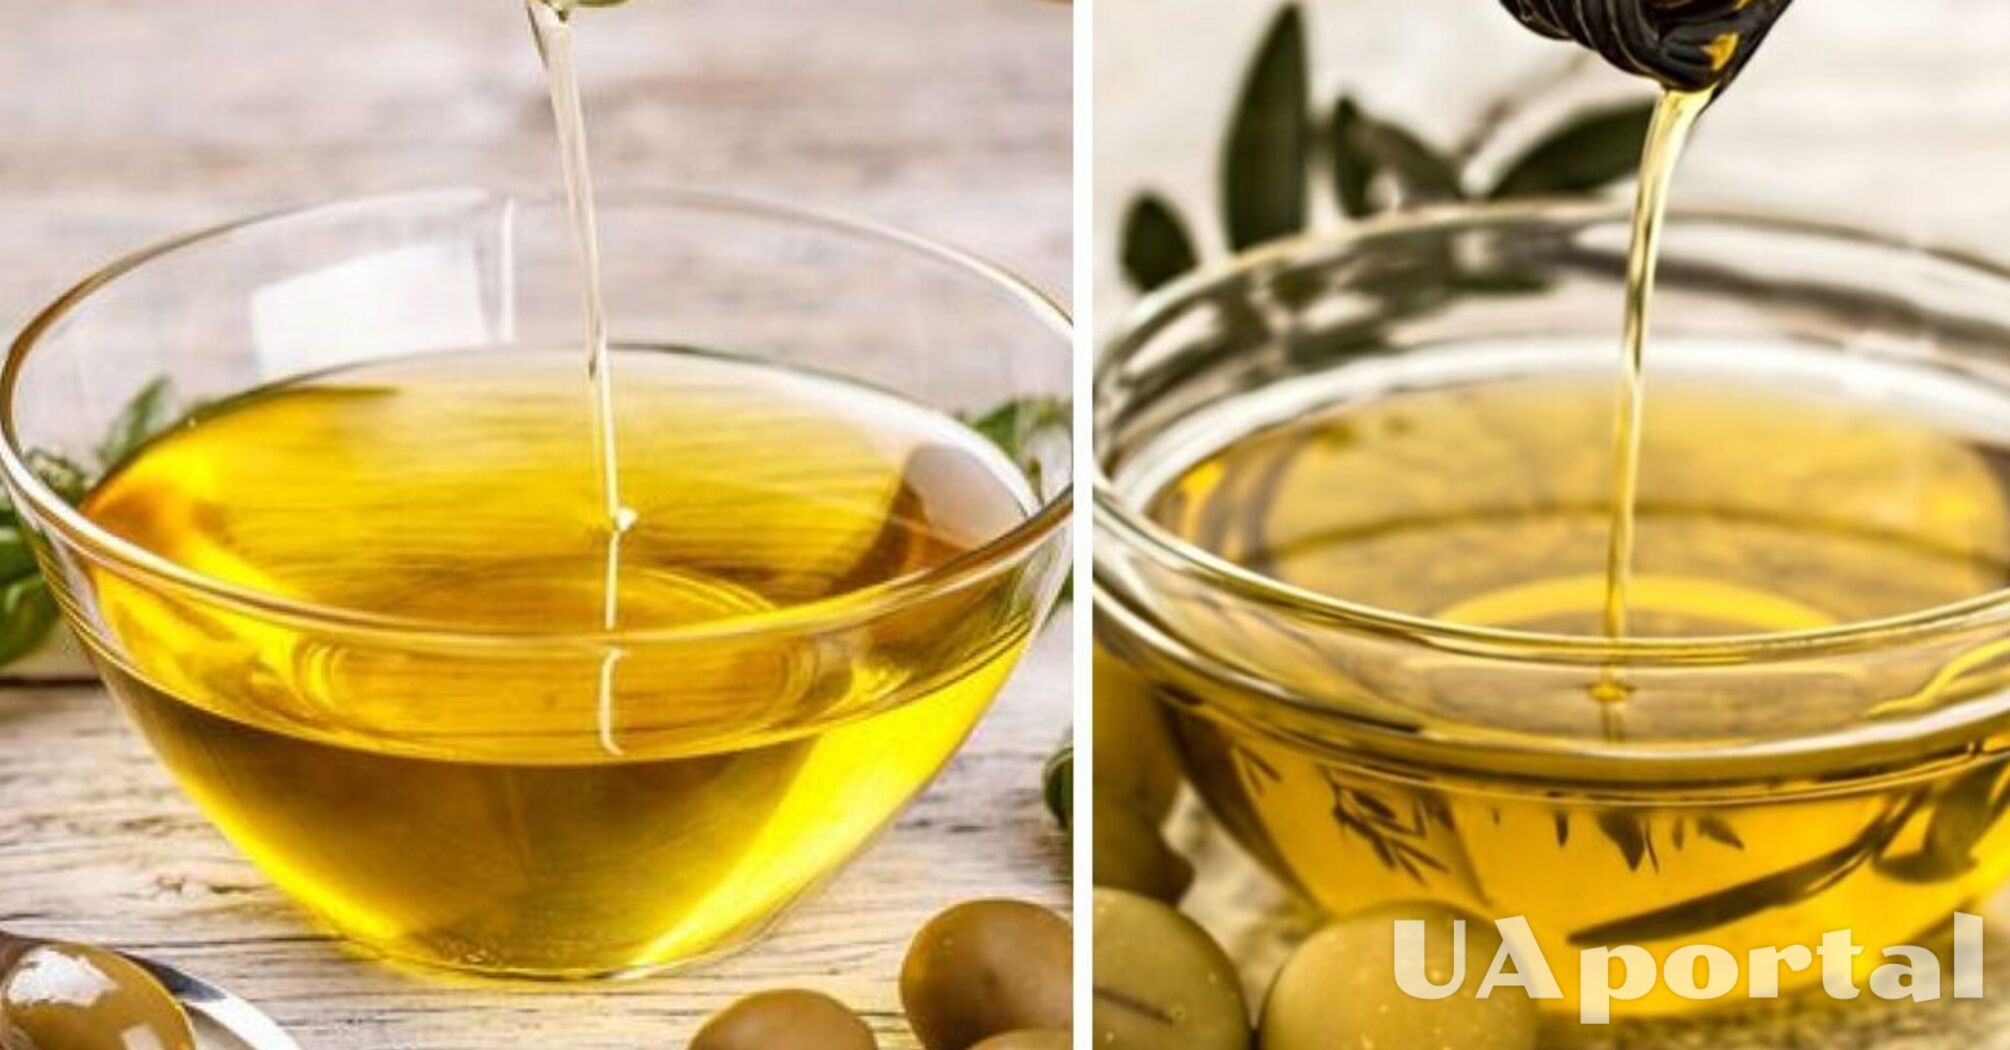 Is it possible to consume olive oil regularly